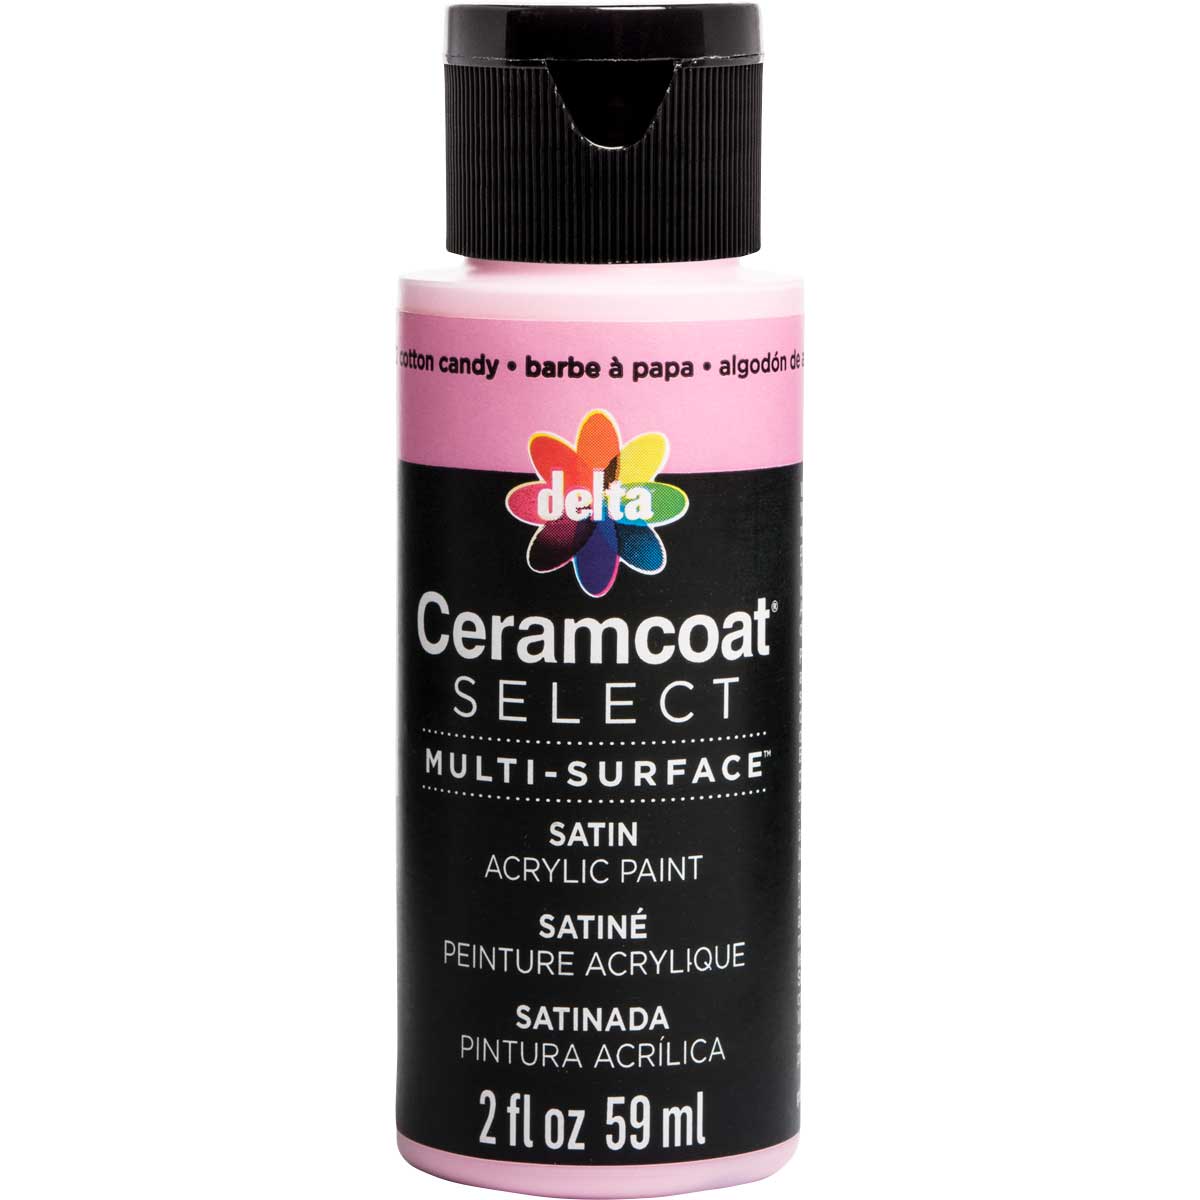 Delta Ceramcoat ® Select Multi-Surface Acrylic Paint - Satin - Cotton Candy, 2 oz. - 04002